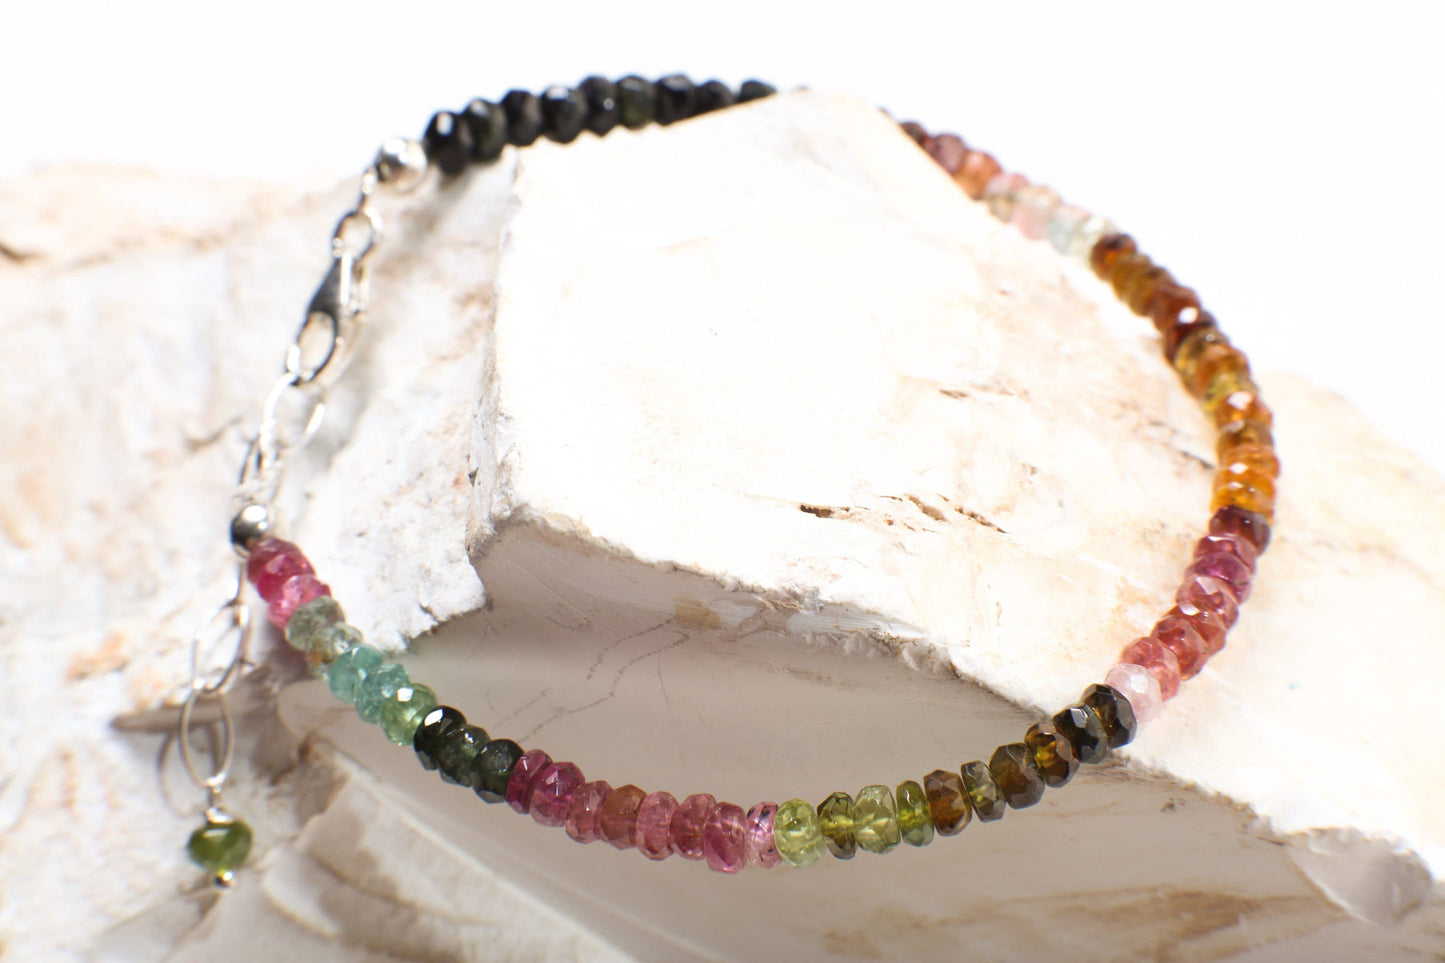 Watermelon Tourmaline 4mm Faceted Rondelle AAA quality in 925 Sterling Silver or 14k gold filled Bracelet with 1” extender .